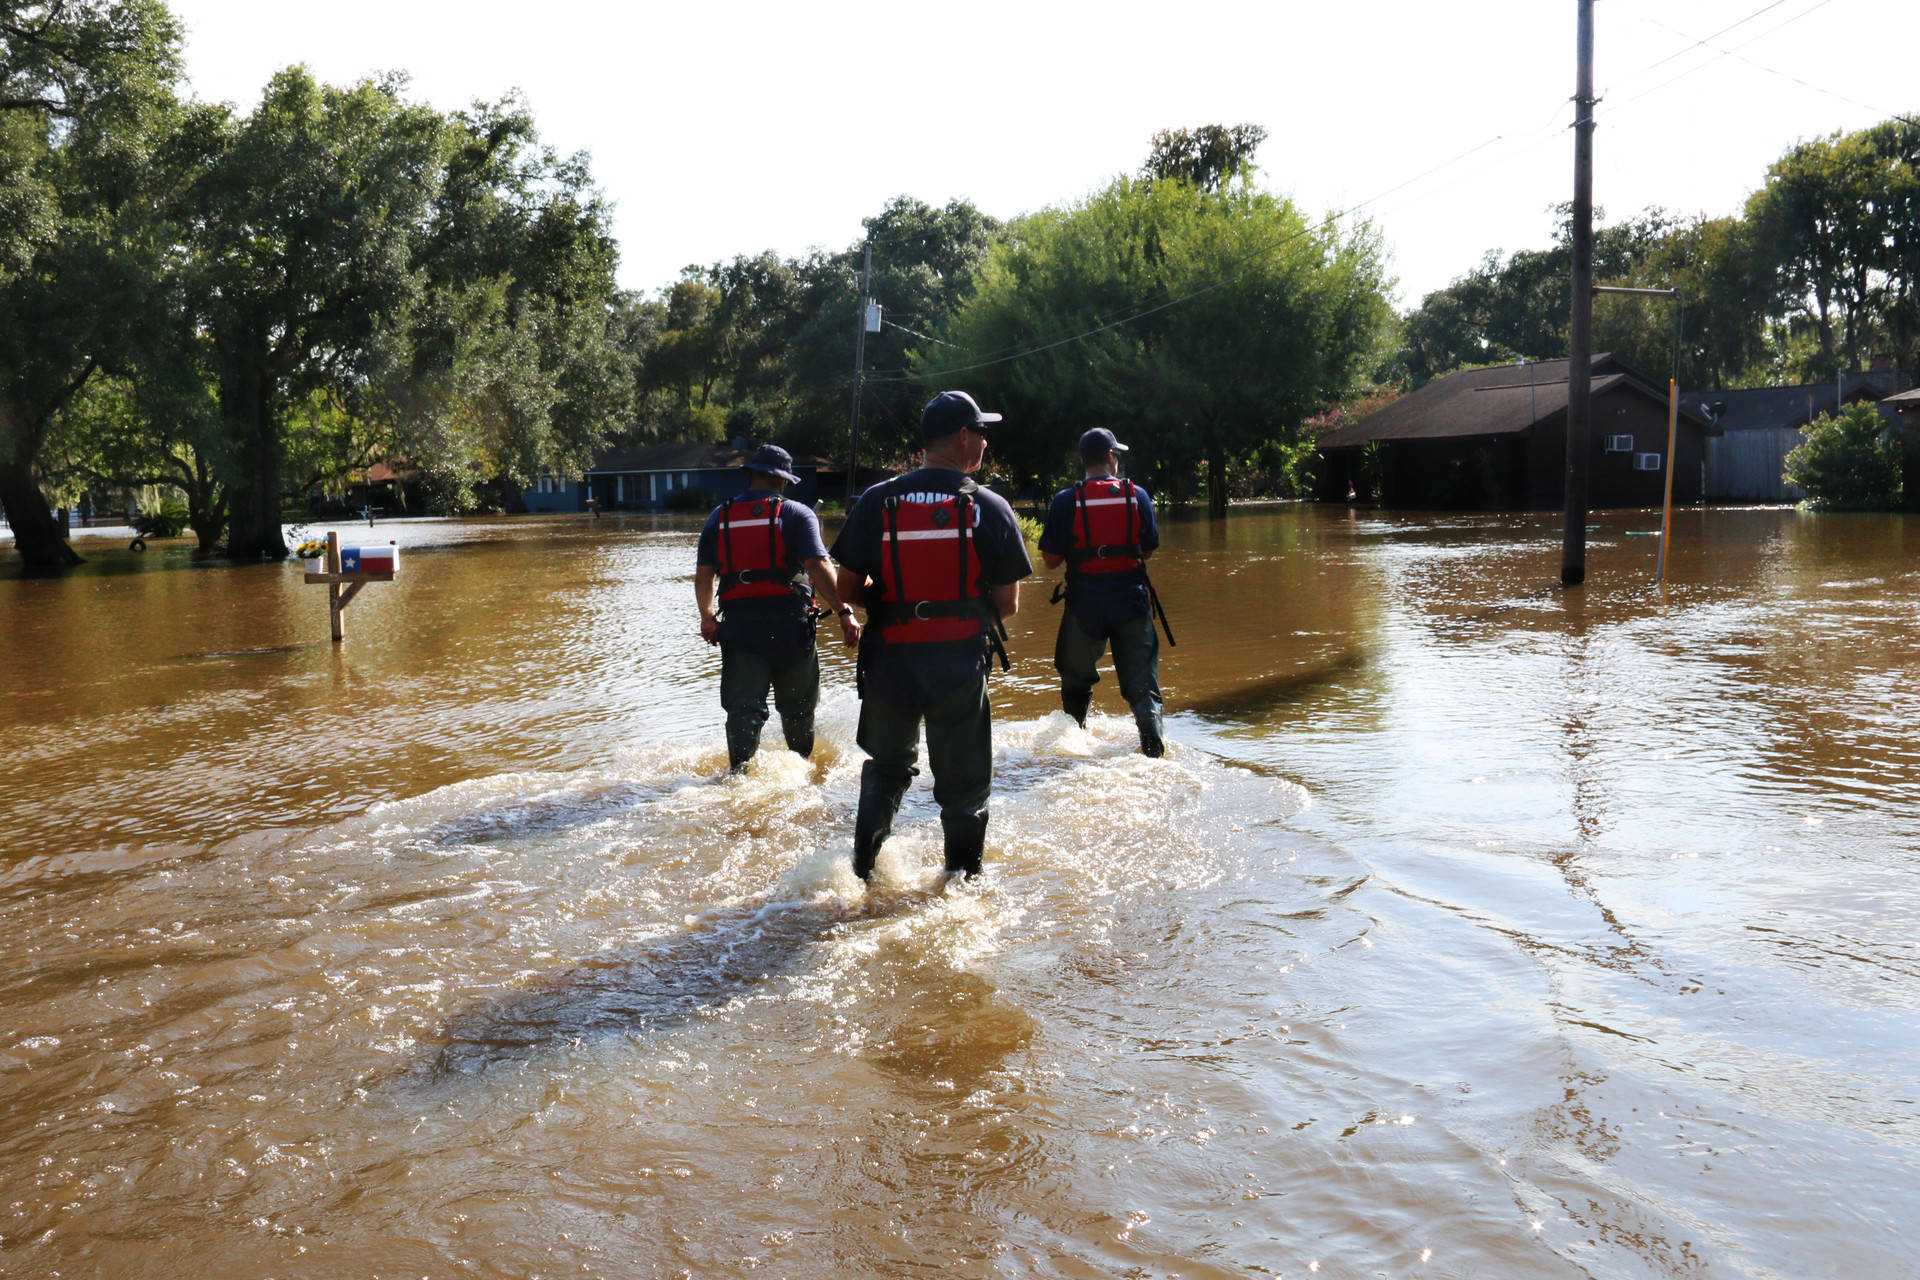 (From Left) Scott Lewis, Mike Wolfe and Dave Lauchner, members of Urban Search and Rescue California Task Force 7 and the Sacramento Fire Department, walk through Richwood, Texas, on Sept. 3, 2017. Richwood is one of many rural communities that continue to see major flooding over a week after Hurricane Harvey hit Texas. Alex Emslie/KQED